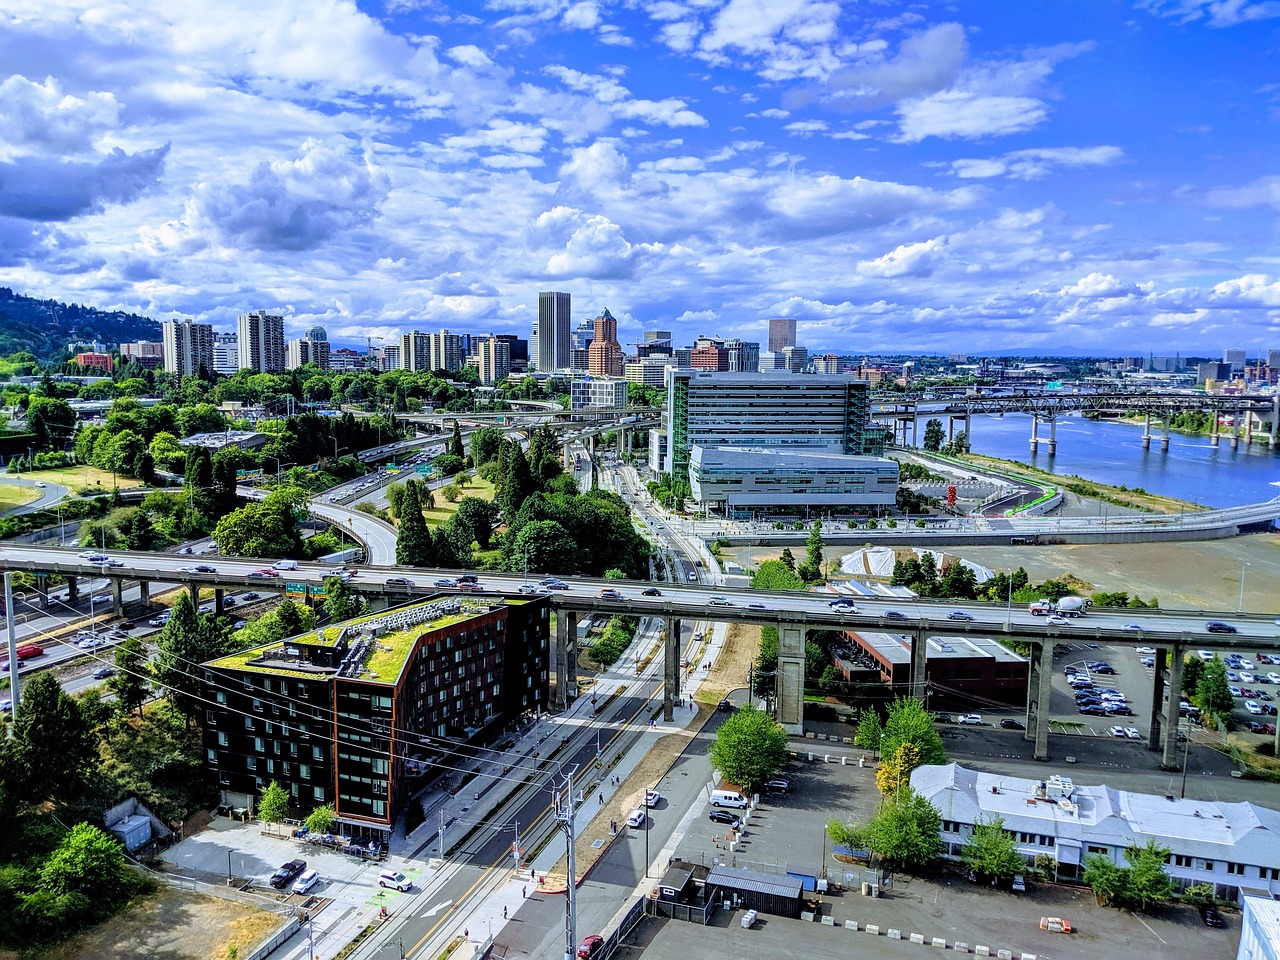 Portland named one of the most walkable cities in the US